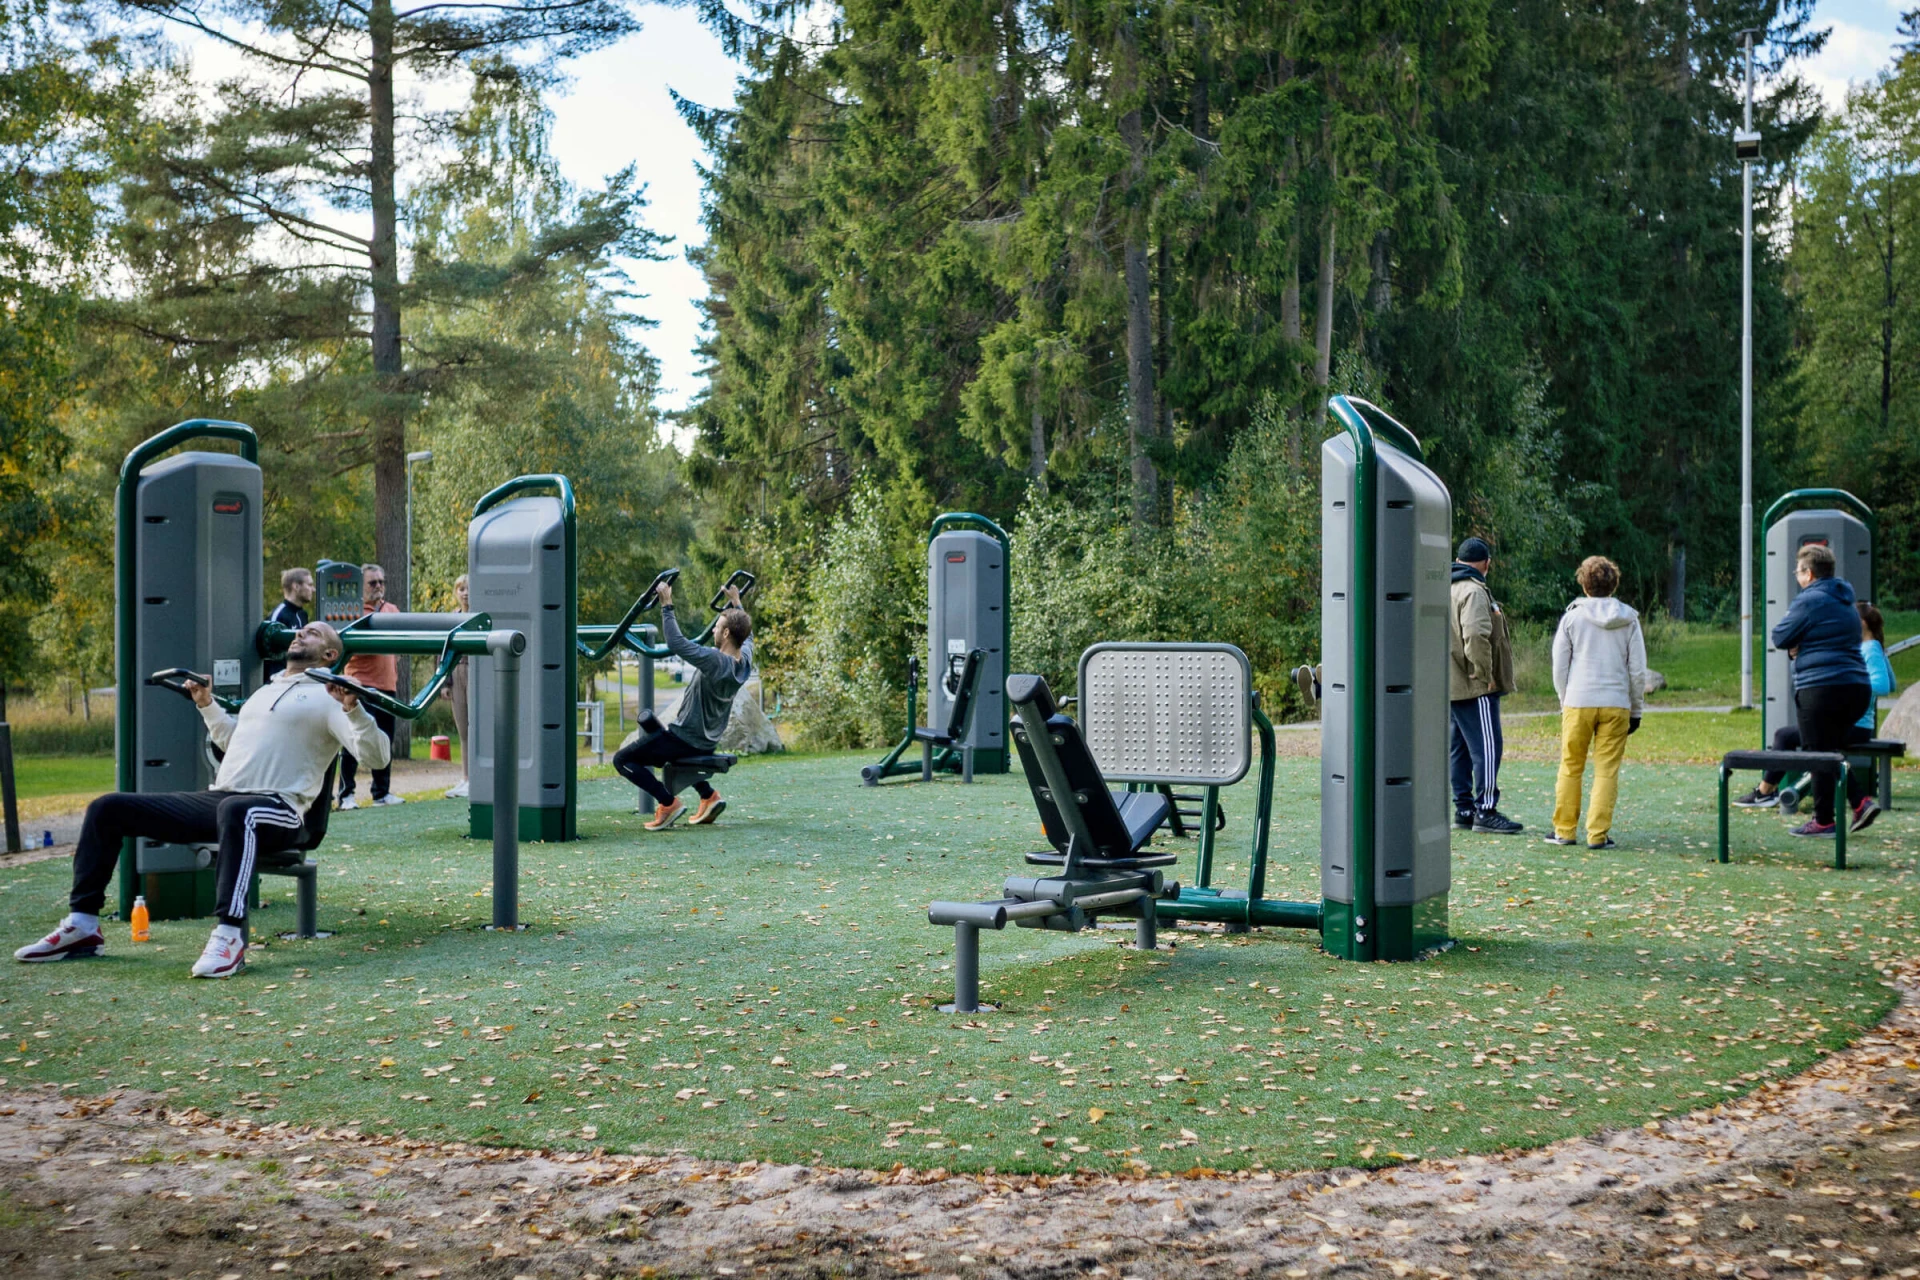 People working out with KOMPAN's outdoor fitness equipment at Kypegården